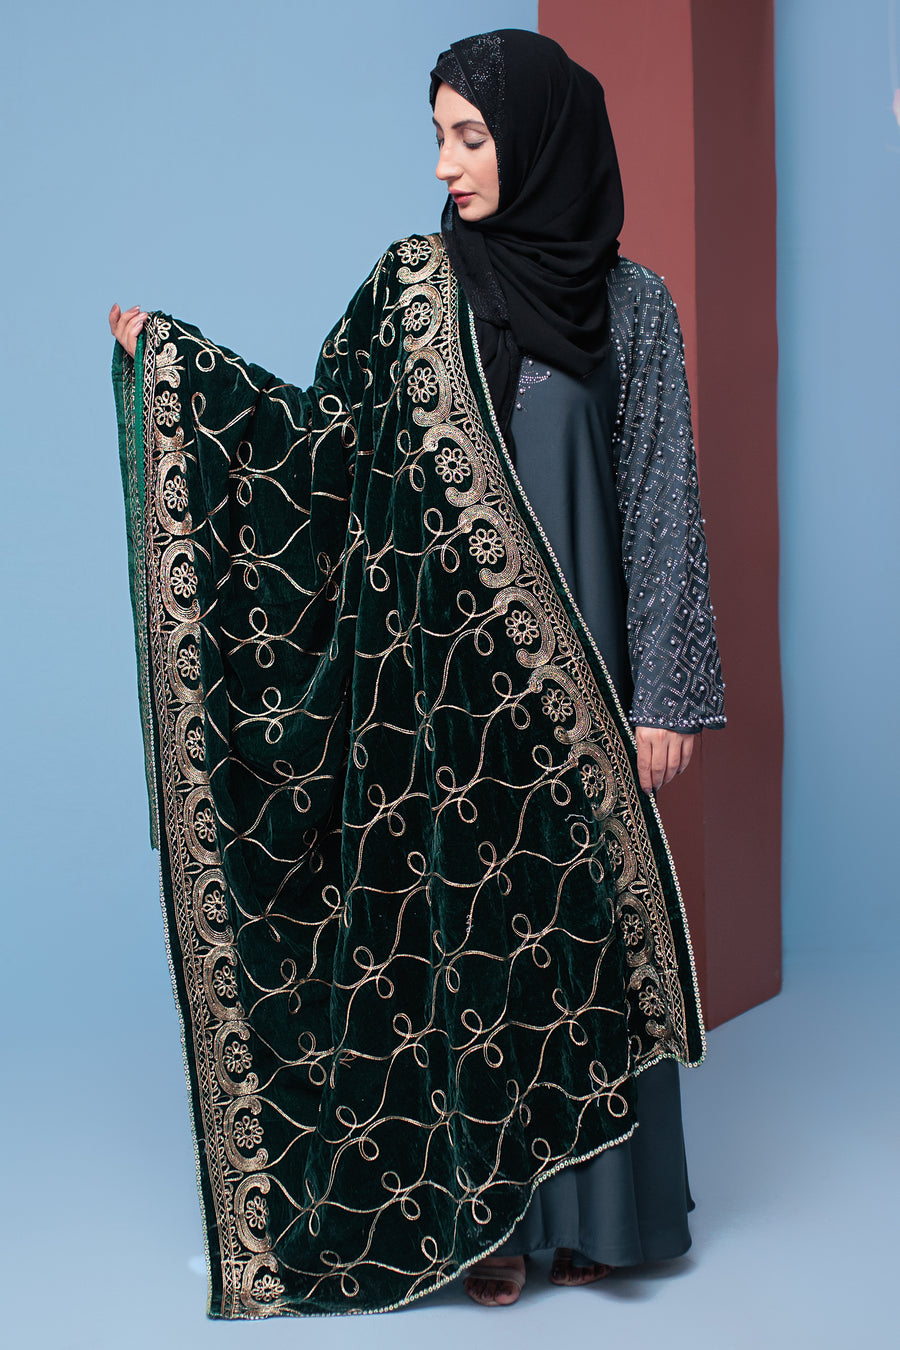 Racing Green embroidered Velvet Shawl- Areeba's Couture